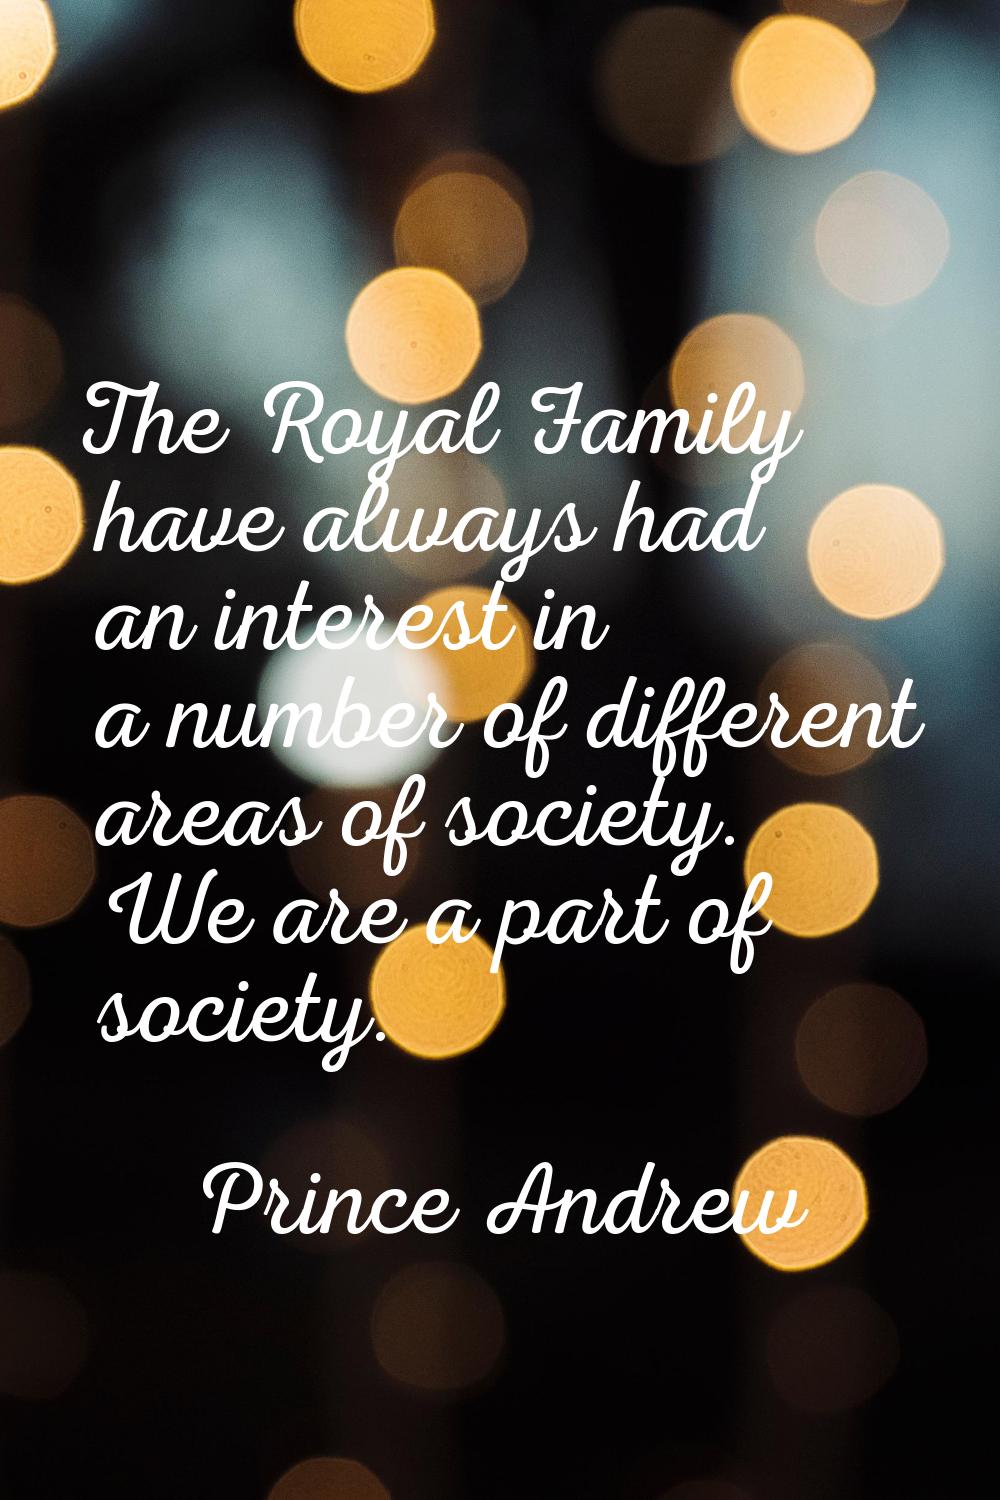 The Royal Family have always had an interest in a number of different areas of society. We are a pa